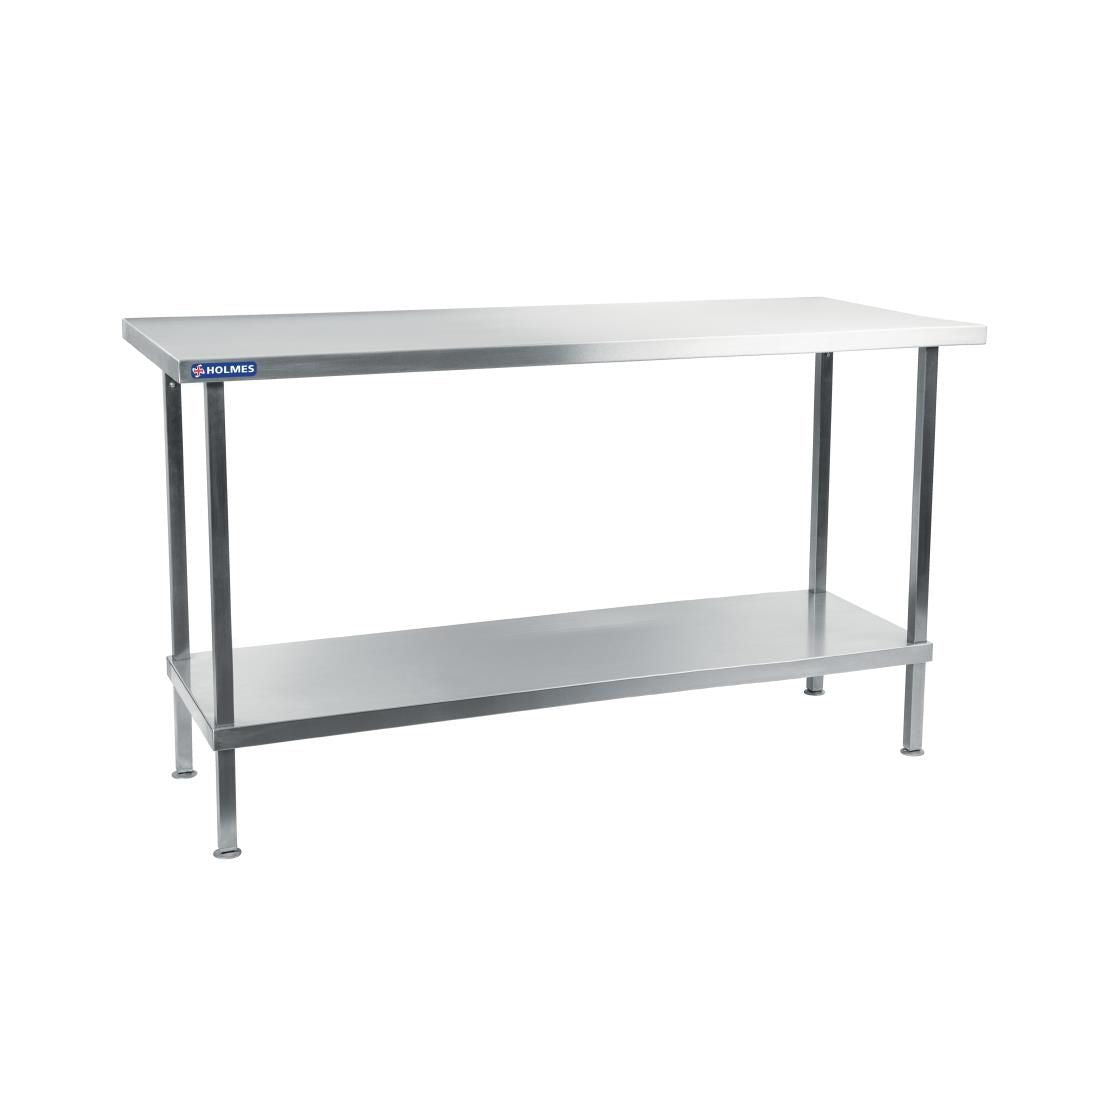 Holmes Self Assembly Stainless Steel Centre Table 900mm - DR354